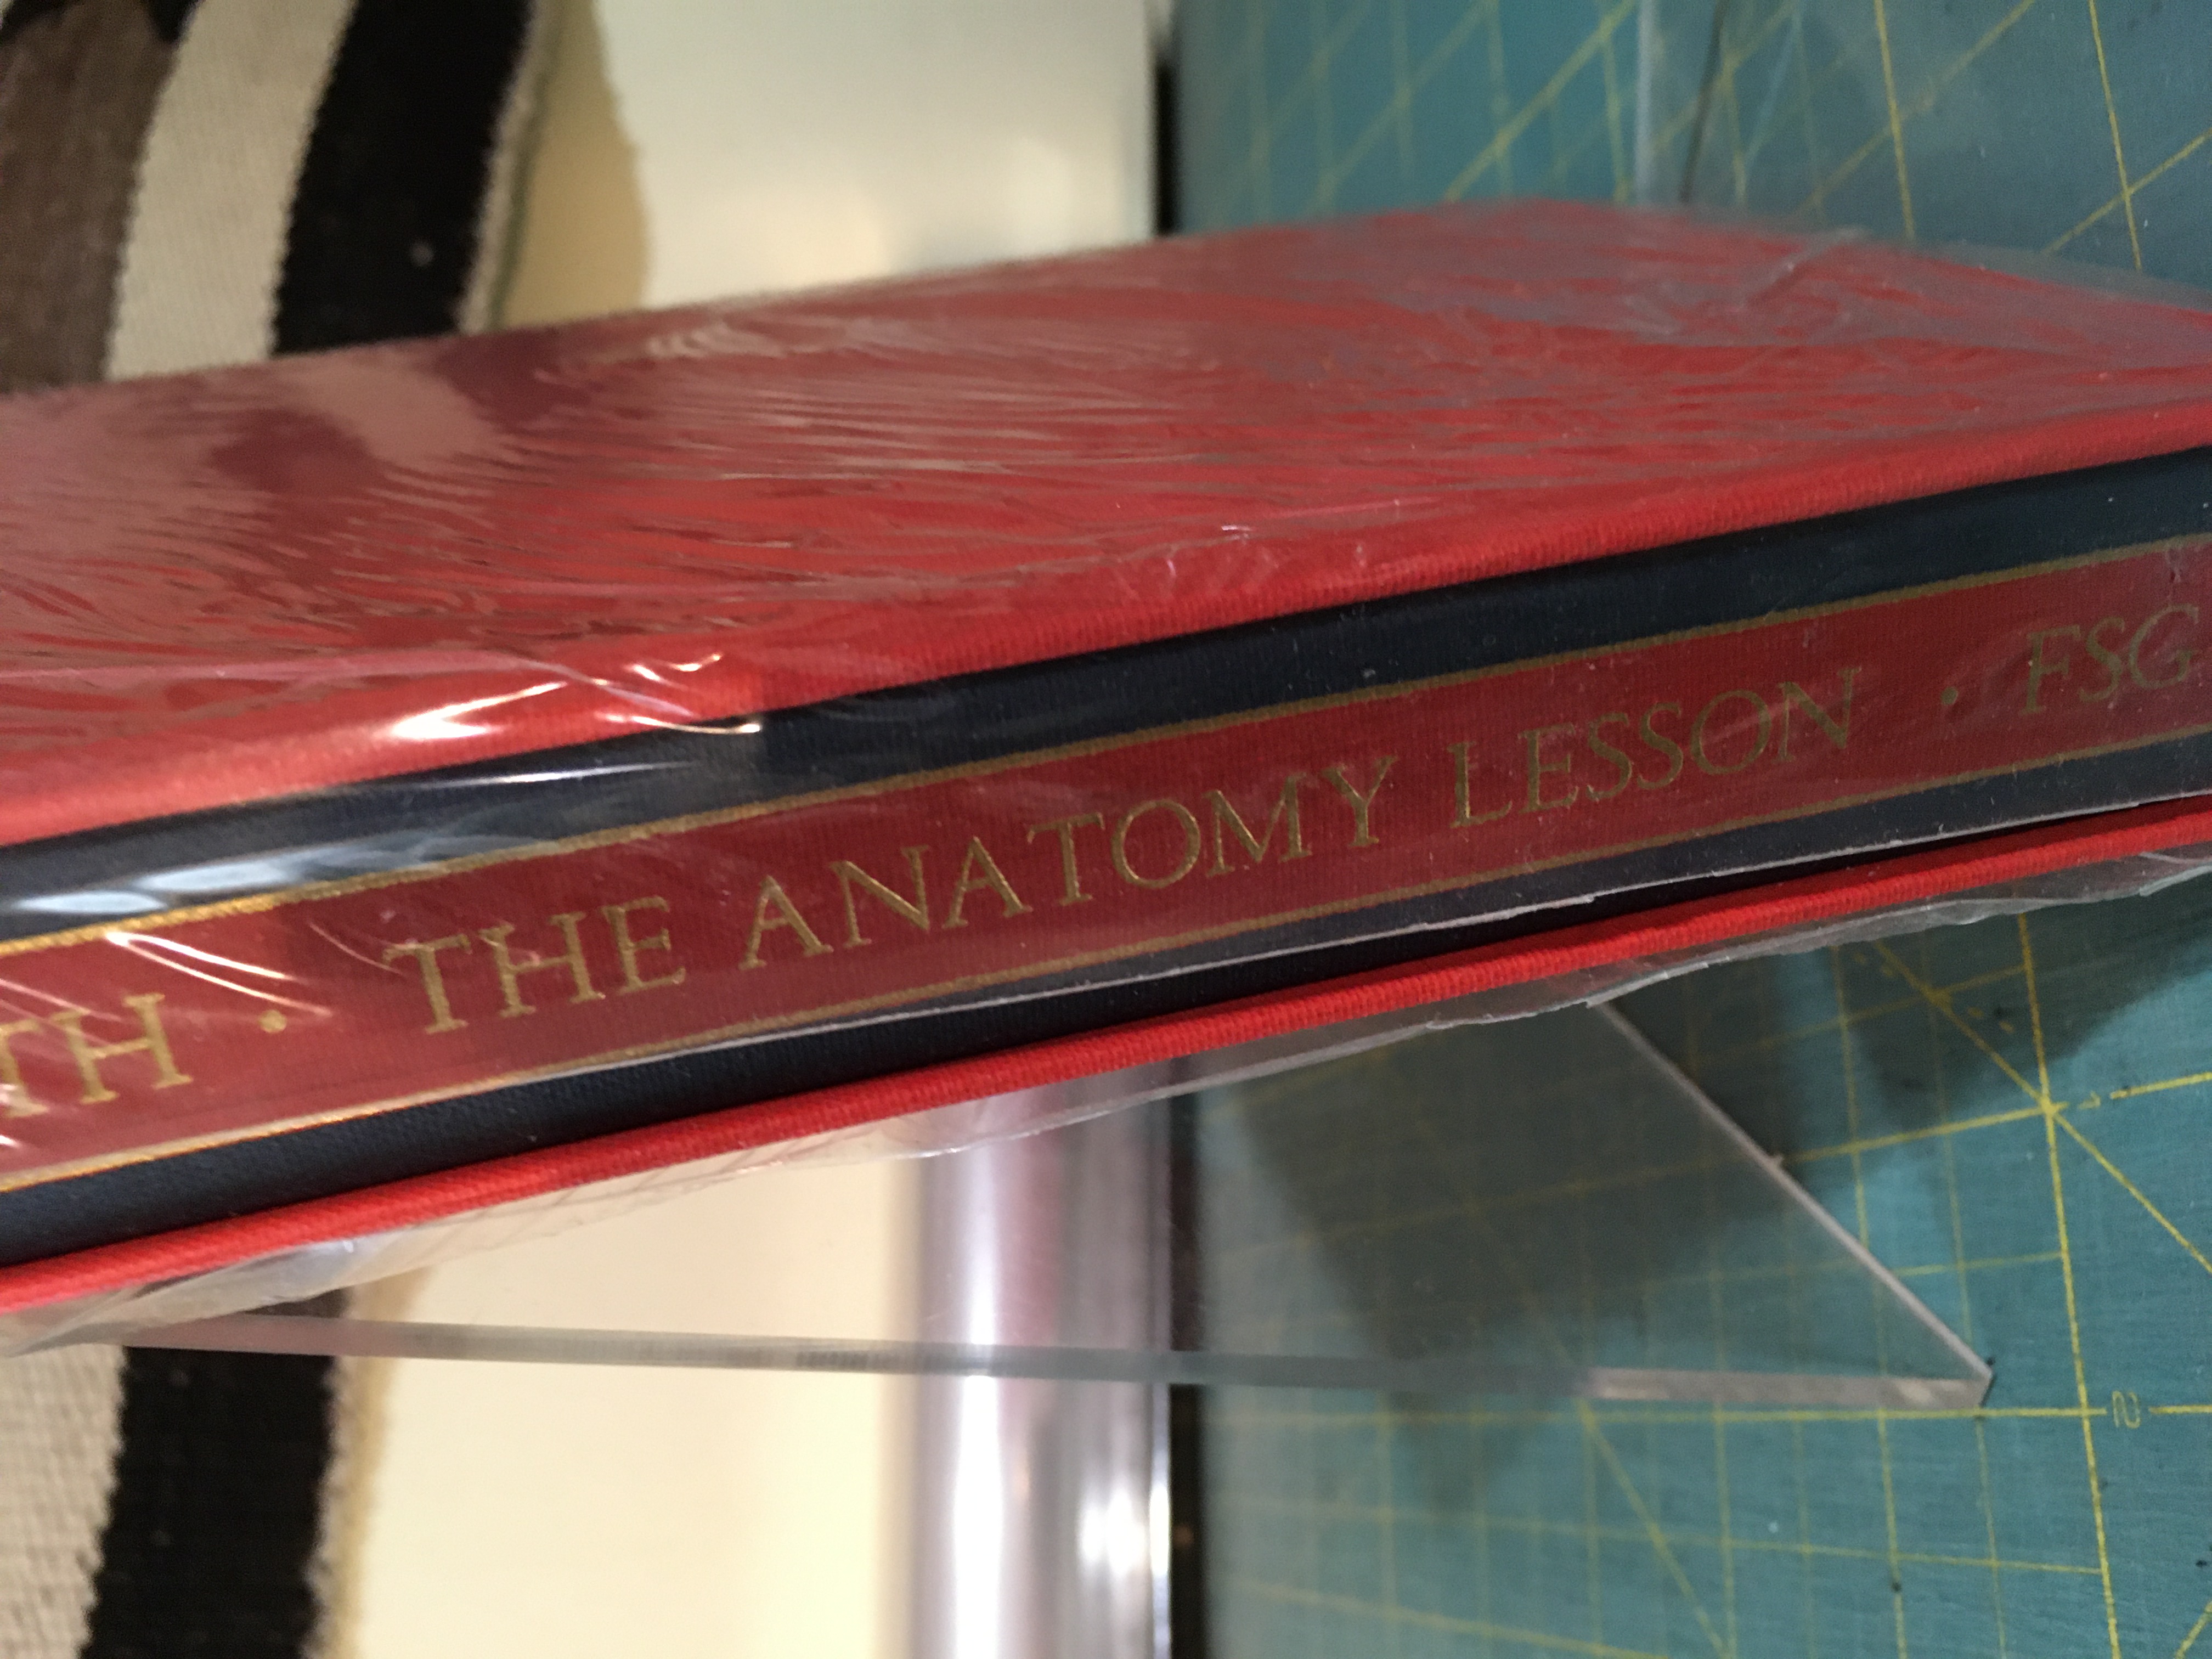 The Anatomy Lesson By Roth Philip Fine Hardcover Signed By Author